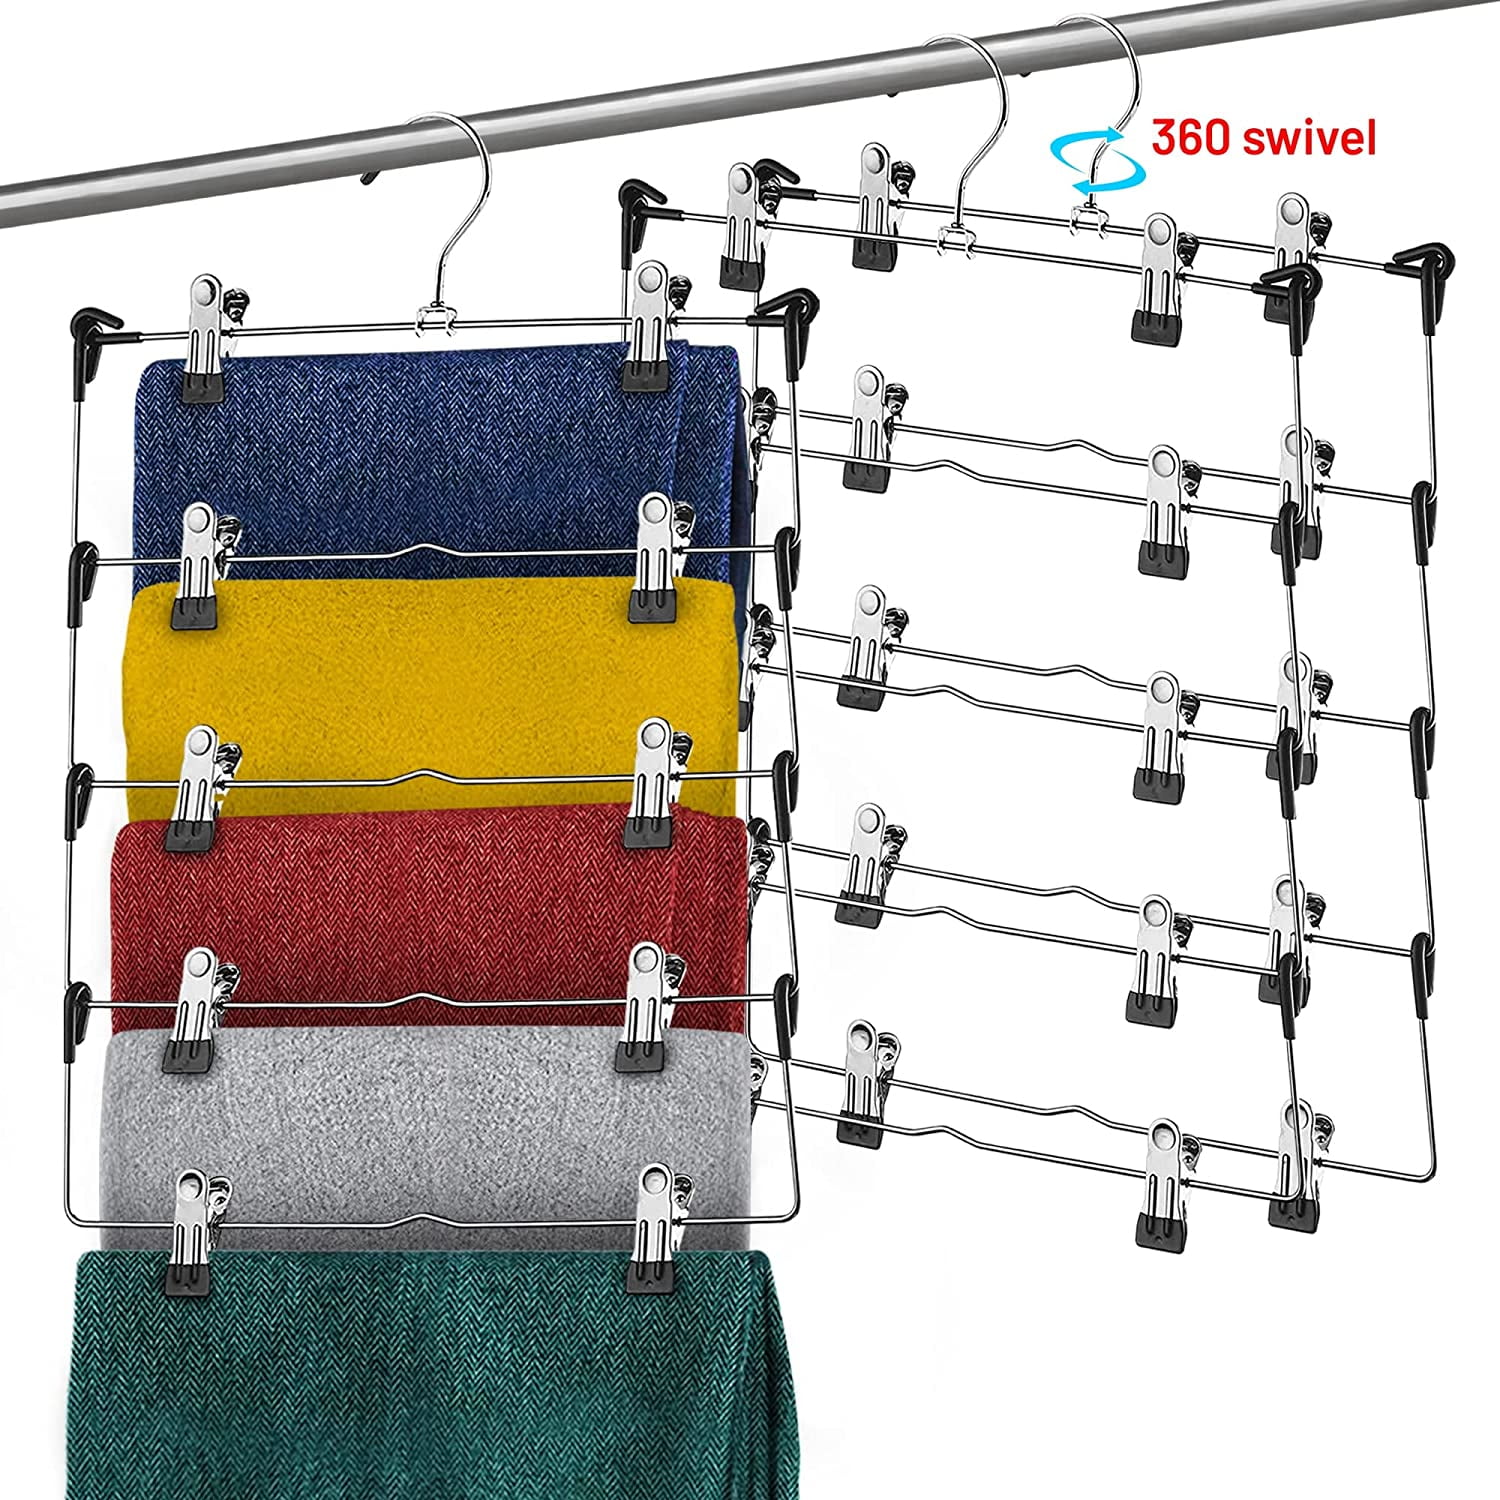 ZOBER Space Saving 5 Tier Metal Skirt Hanger with Clips (3 Pack) Hang  5-on-1, Gain 70% More Space, Rubber Coated Hanger Clips, 360